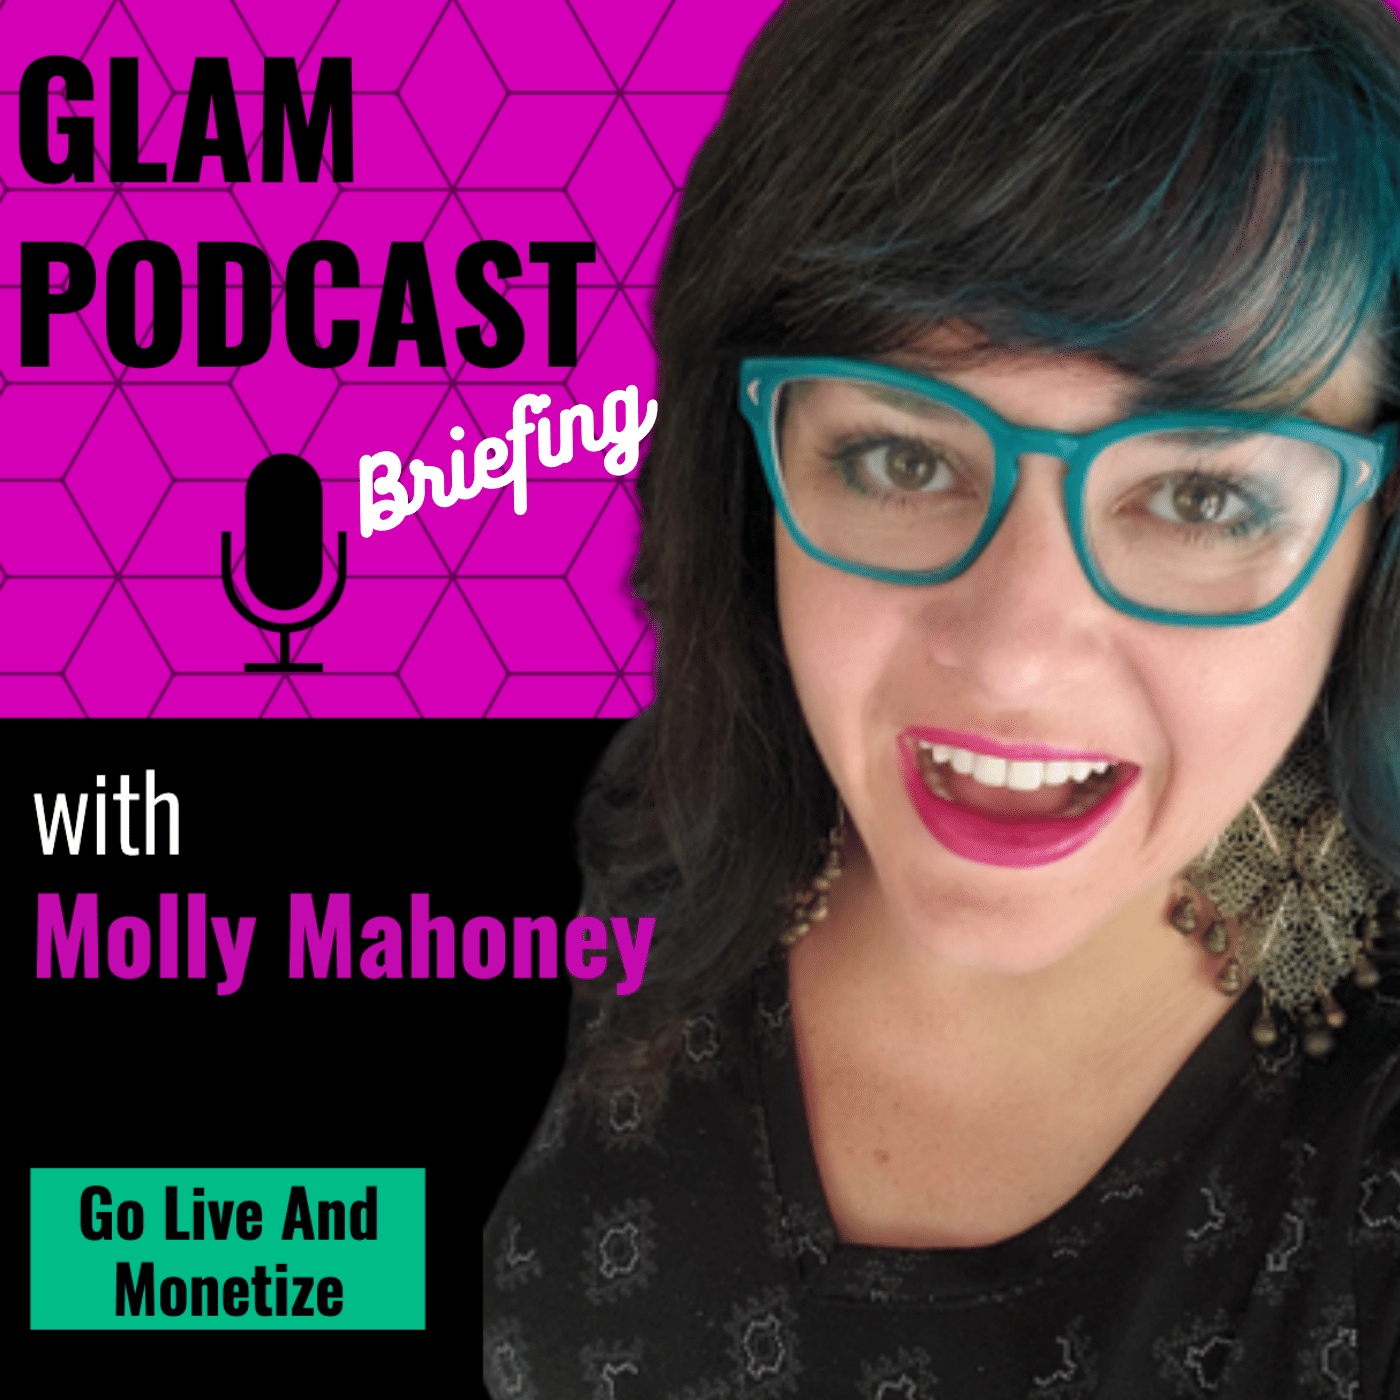 GLAM: Go Live And Monetize Briefing w/Molly Mahoney